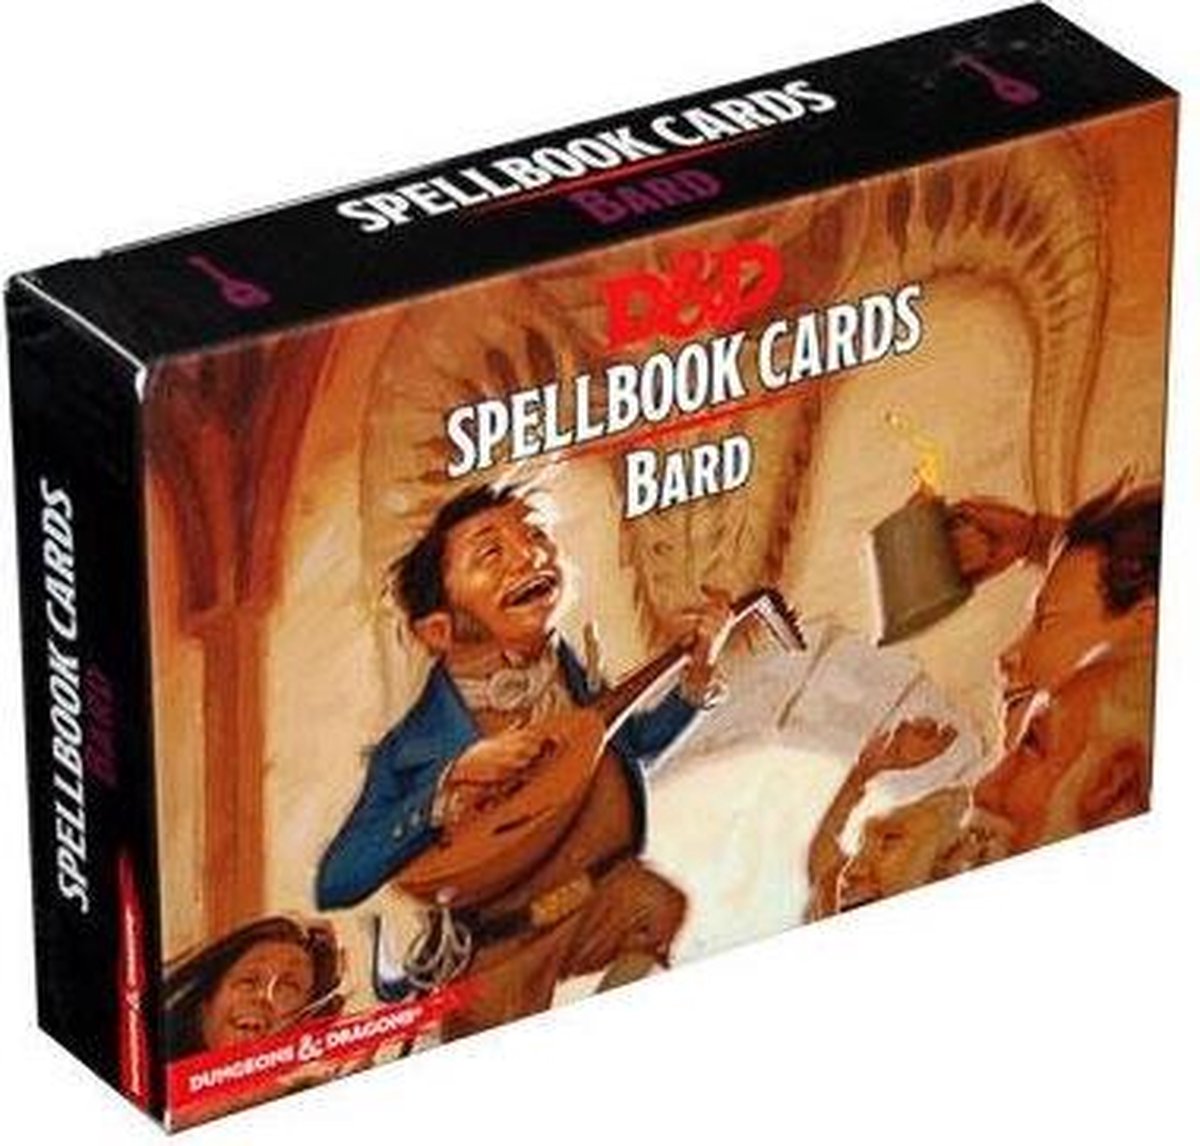 D&D Spellbook Cards Bard Deck - Dungeons and Dragons